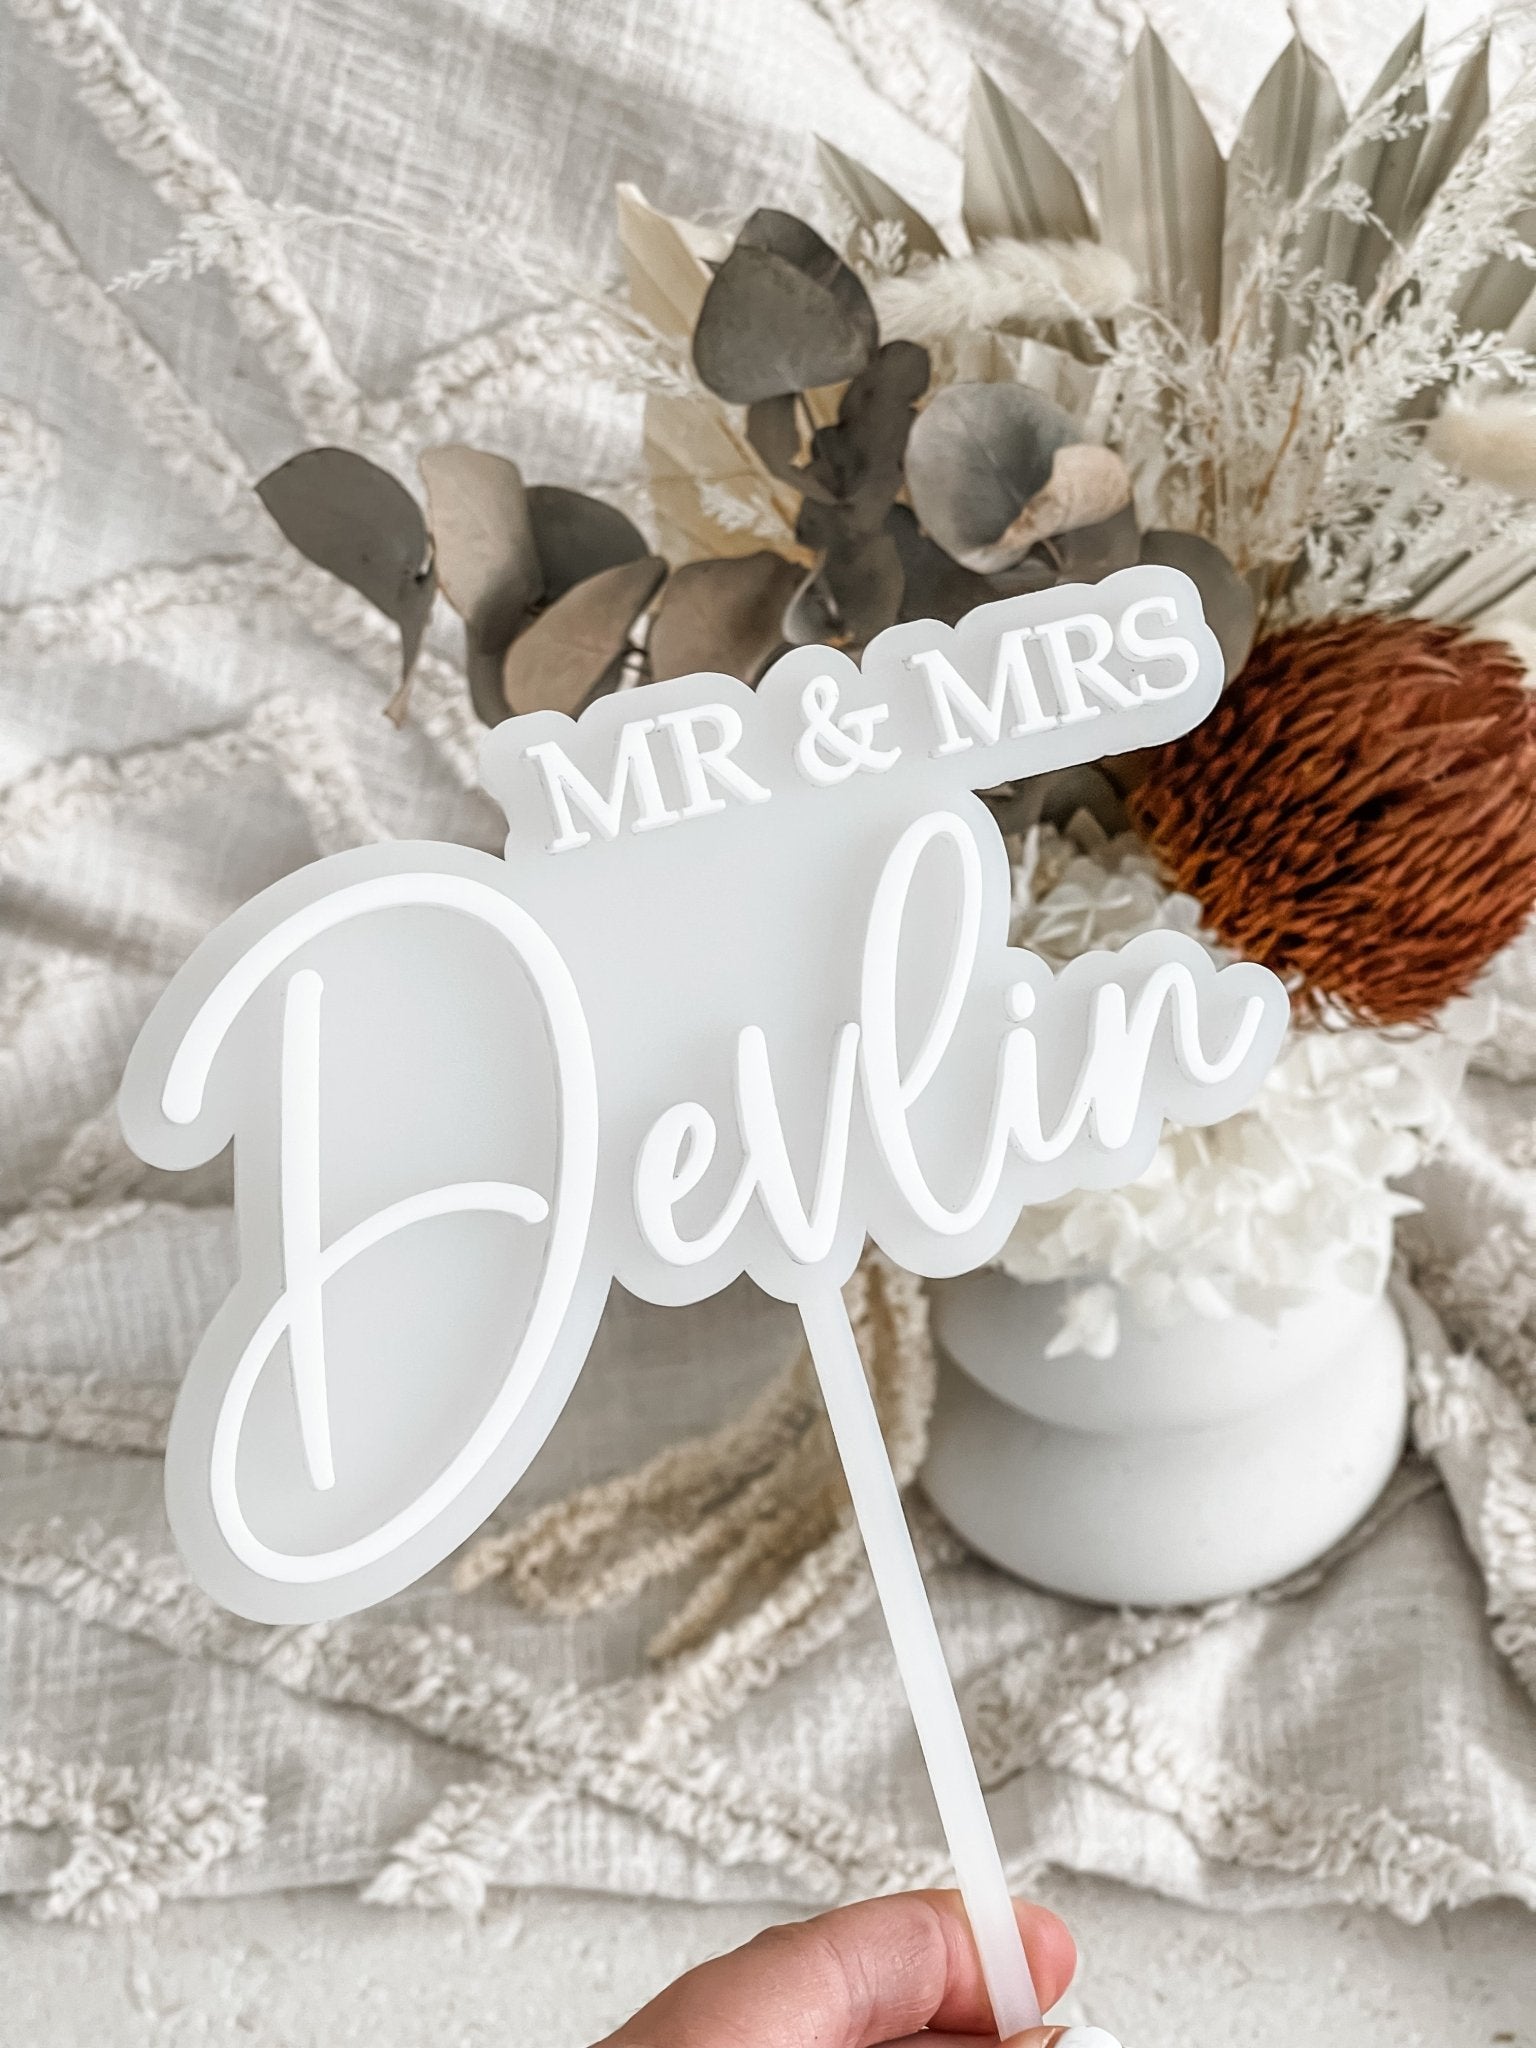 Mr & Mrs Acrylic Cake Topper - Style 02 - The Humble Gift Co.